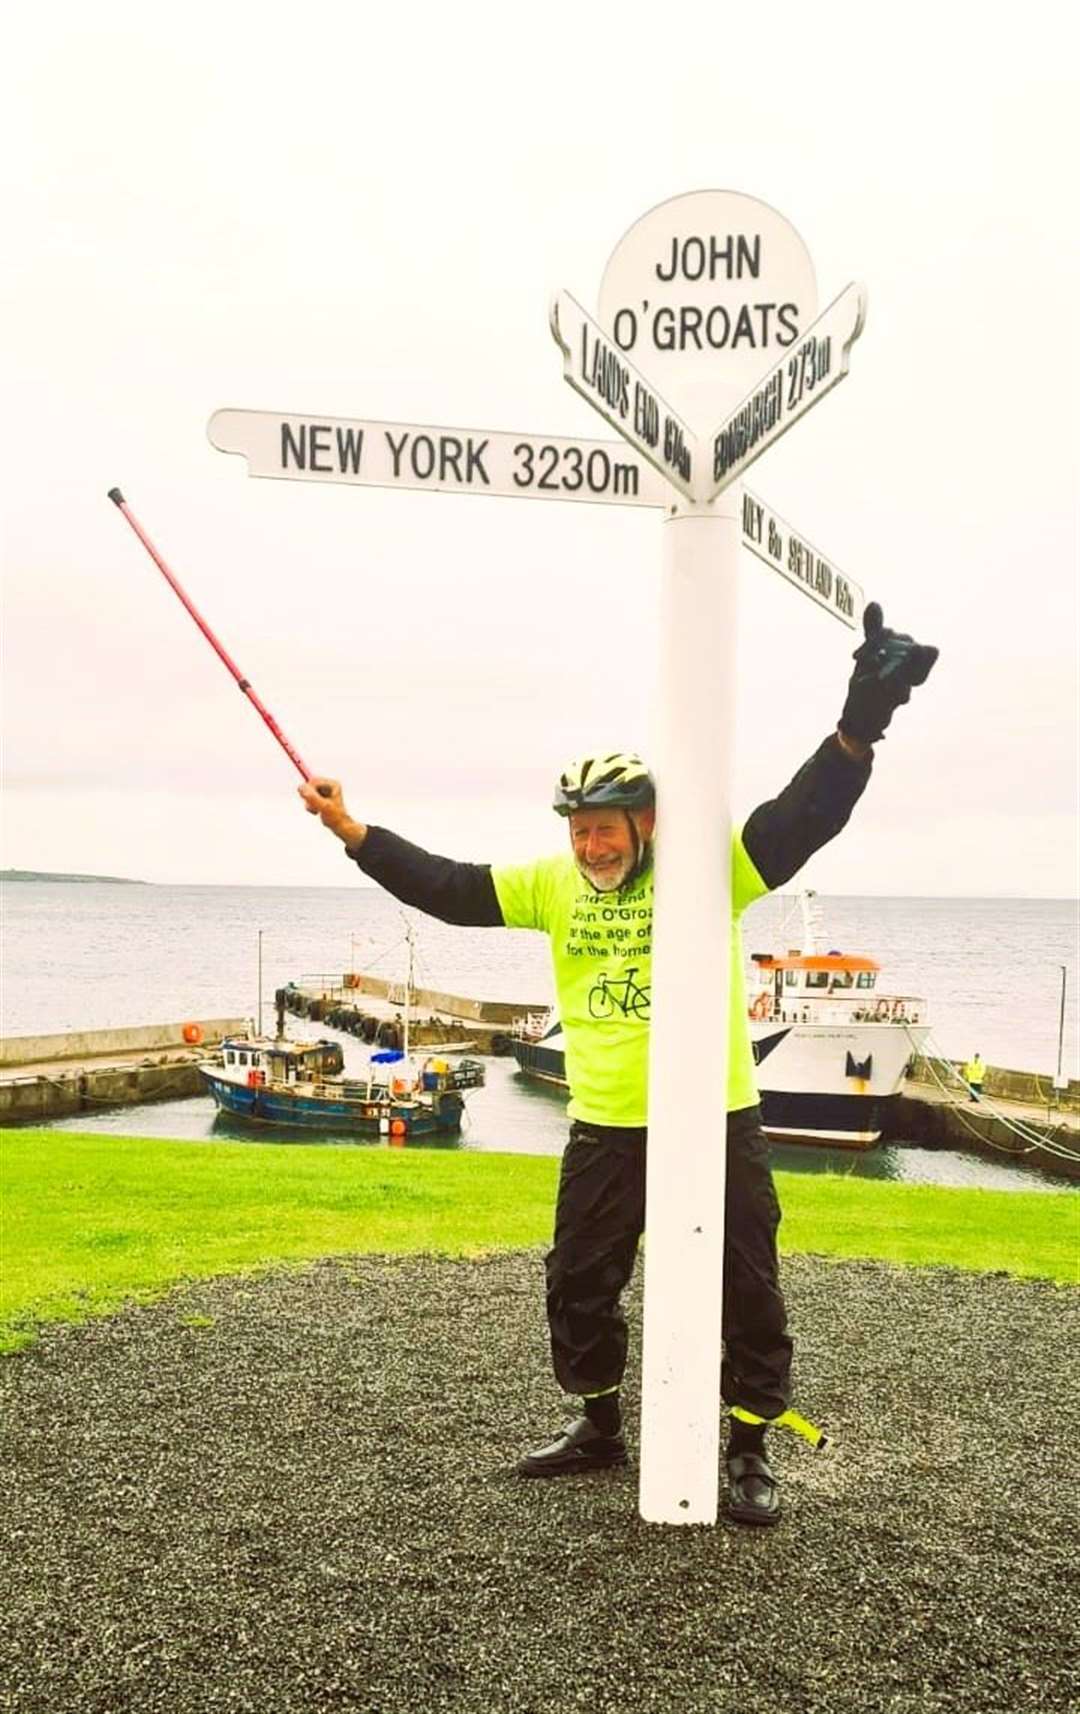 A jubilant Peter celebrates at John O'Groats after finishing the gruelling cycle run on September 21. He uses a walking stick due to arthritis but says he is fine when he cycles.